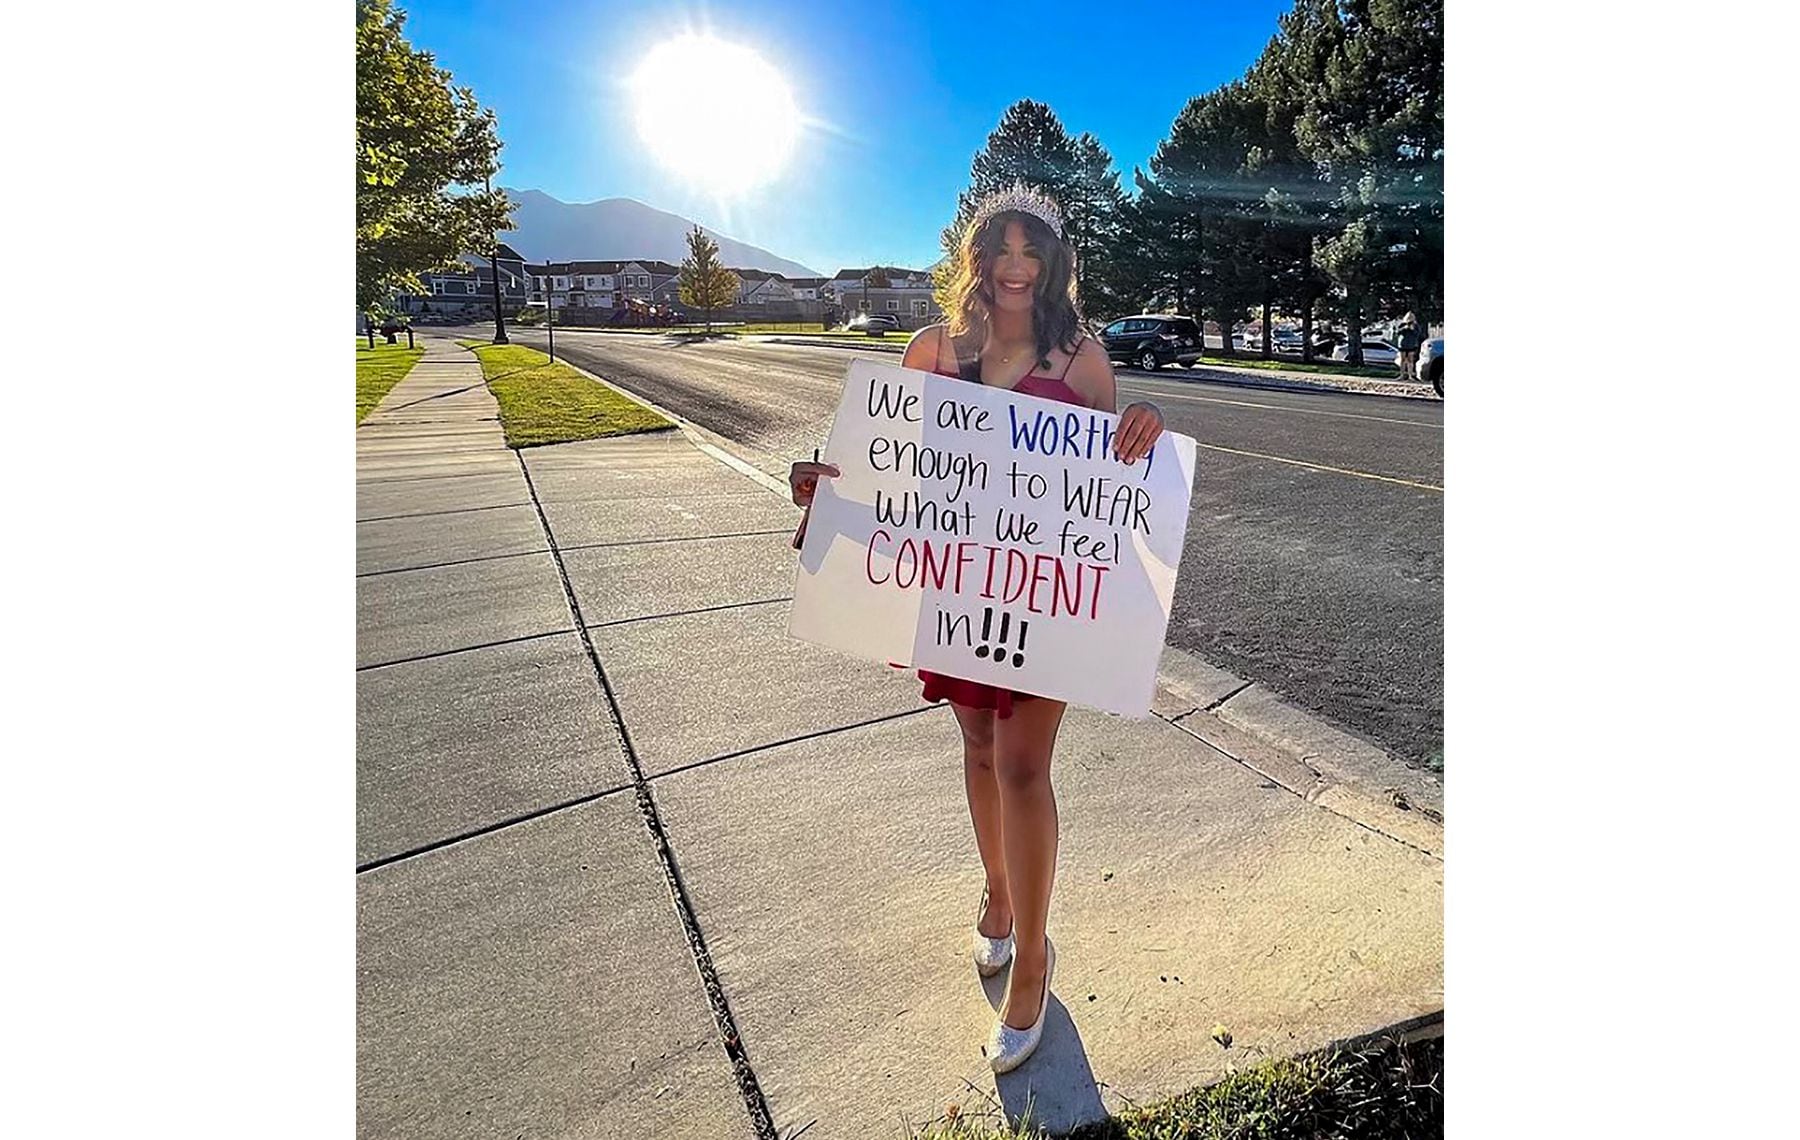 Utah teacher accuses students of forming a 'mob' when they protested  homecoming dress code